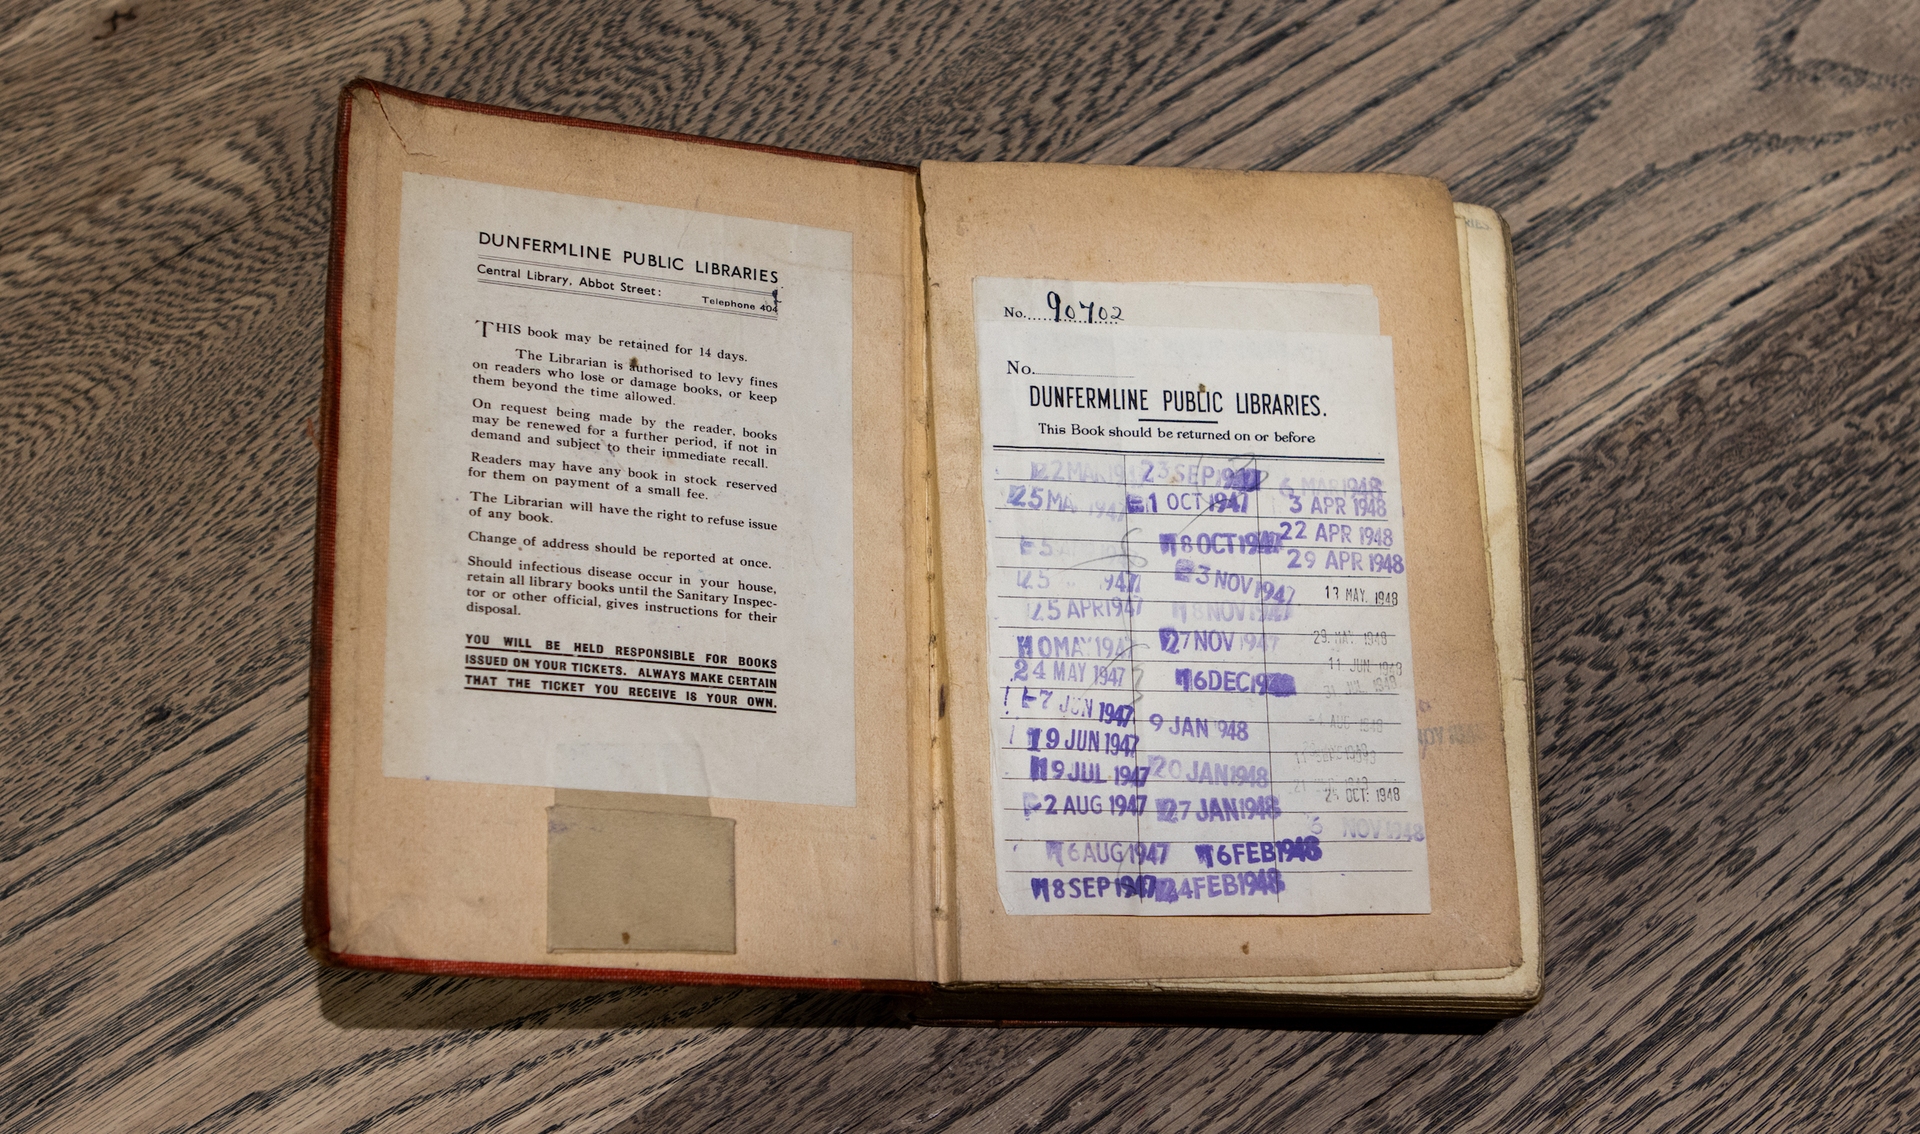 The library book was taken out during and after the Second World War.